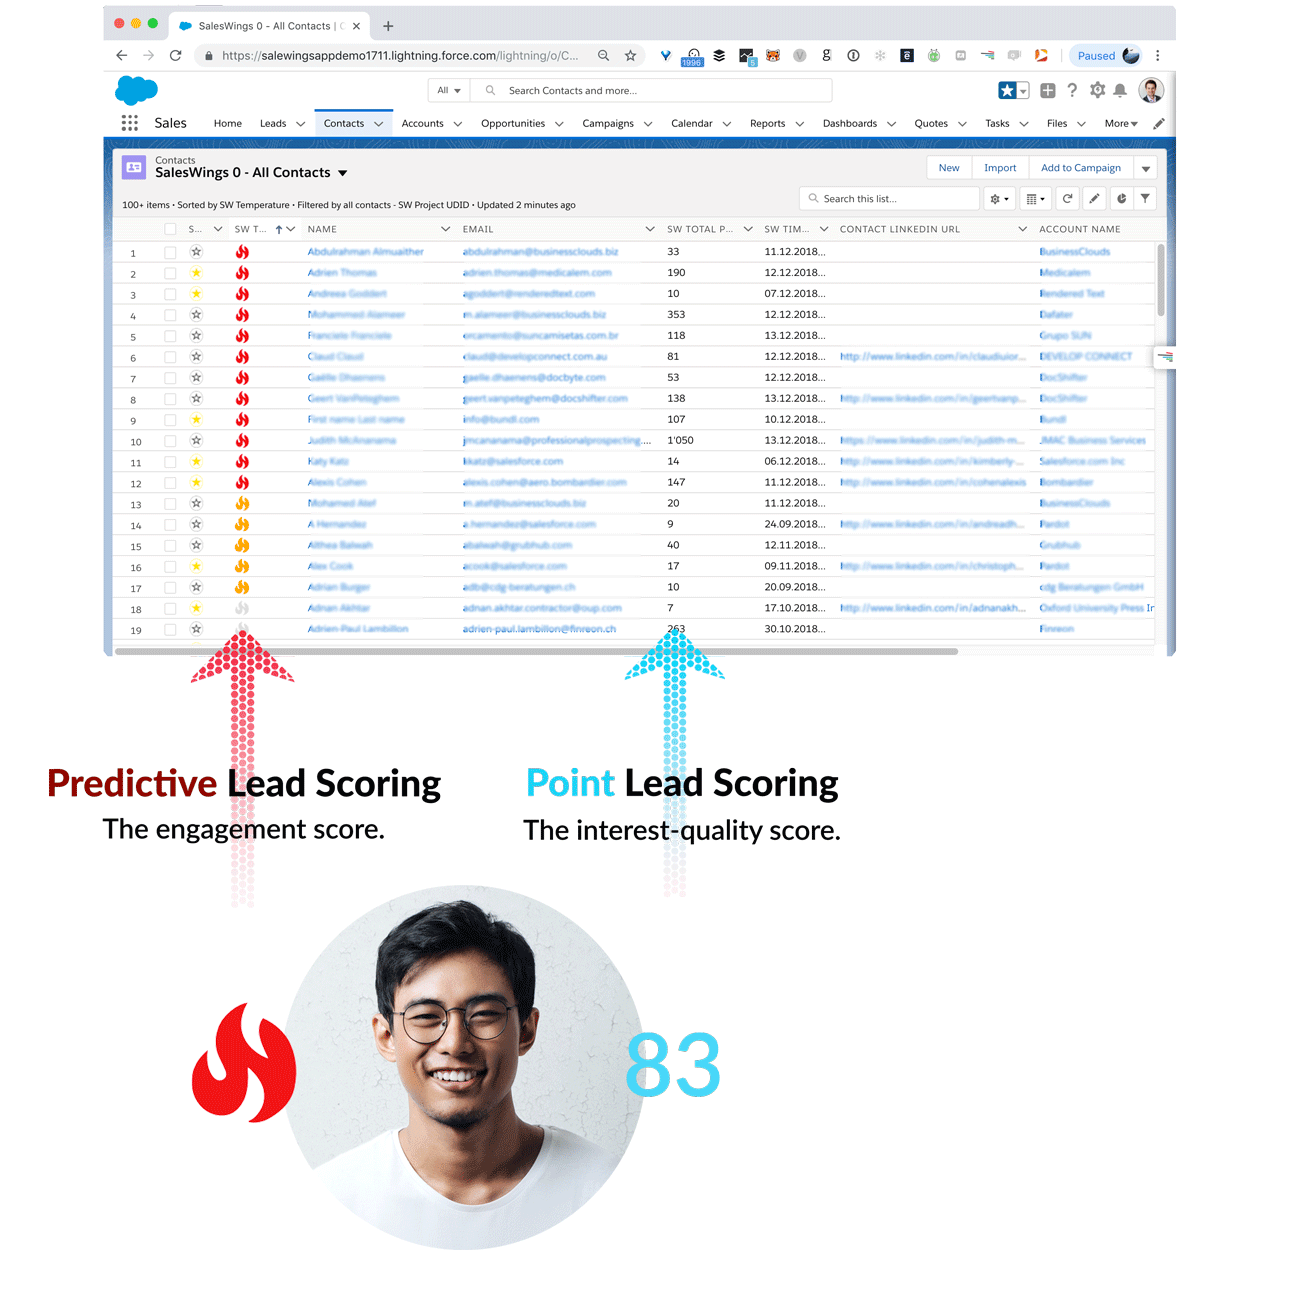 Predictive lead scoring and point lead scoring directly available in Sales Cloud or any other CRM.